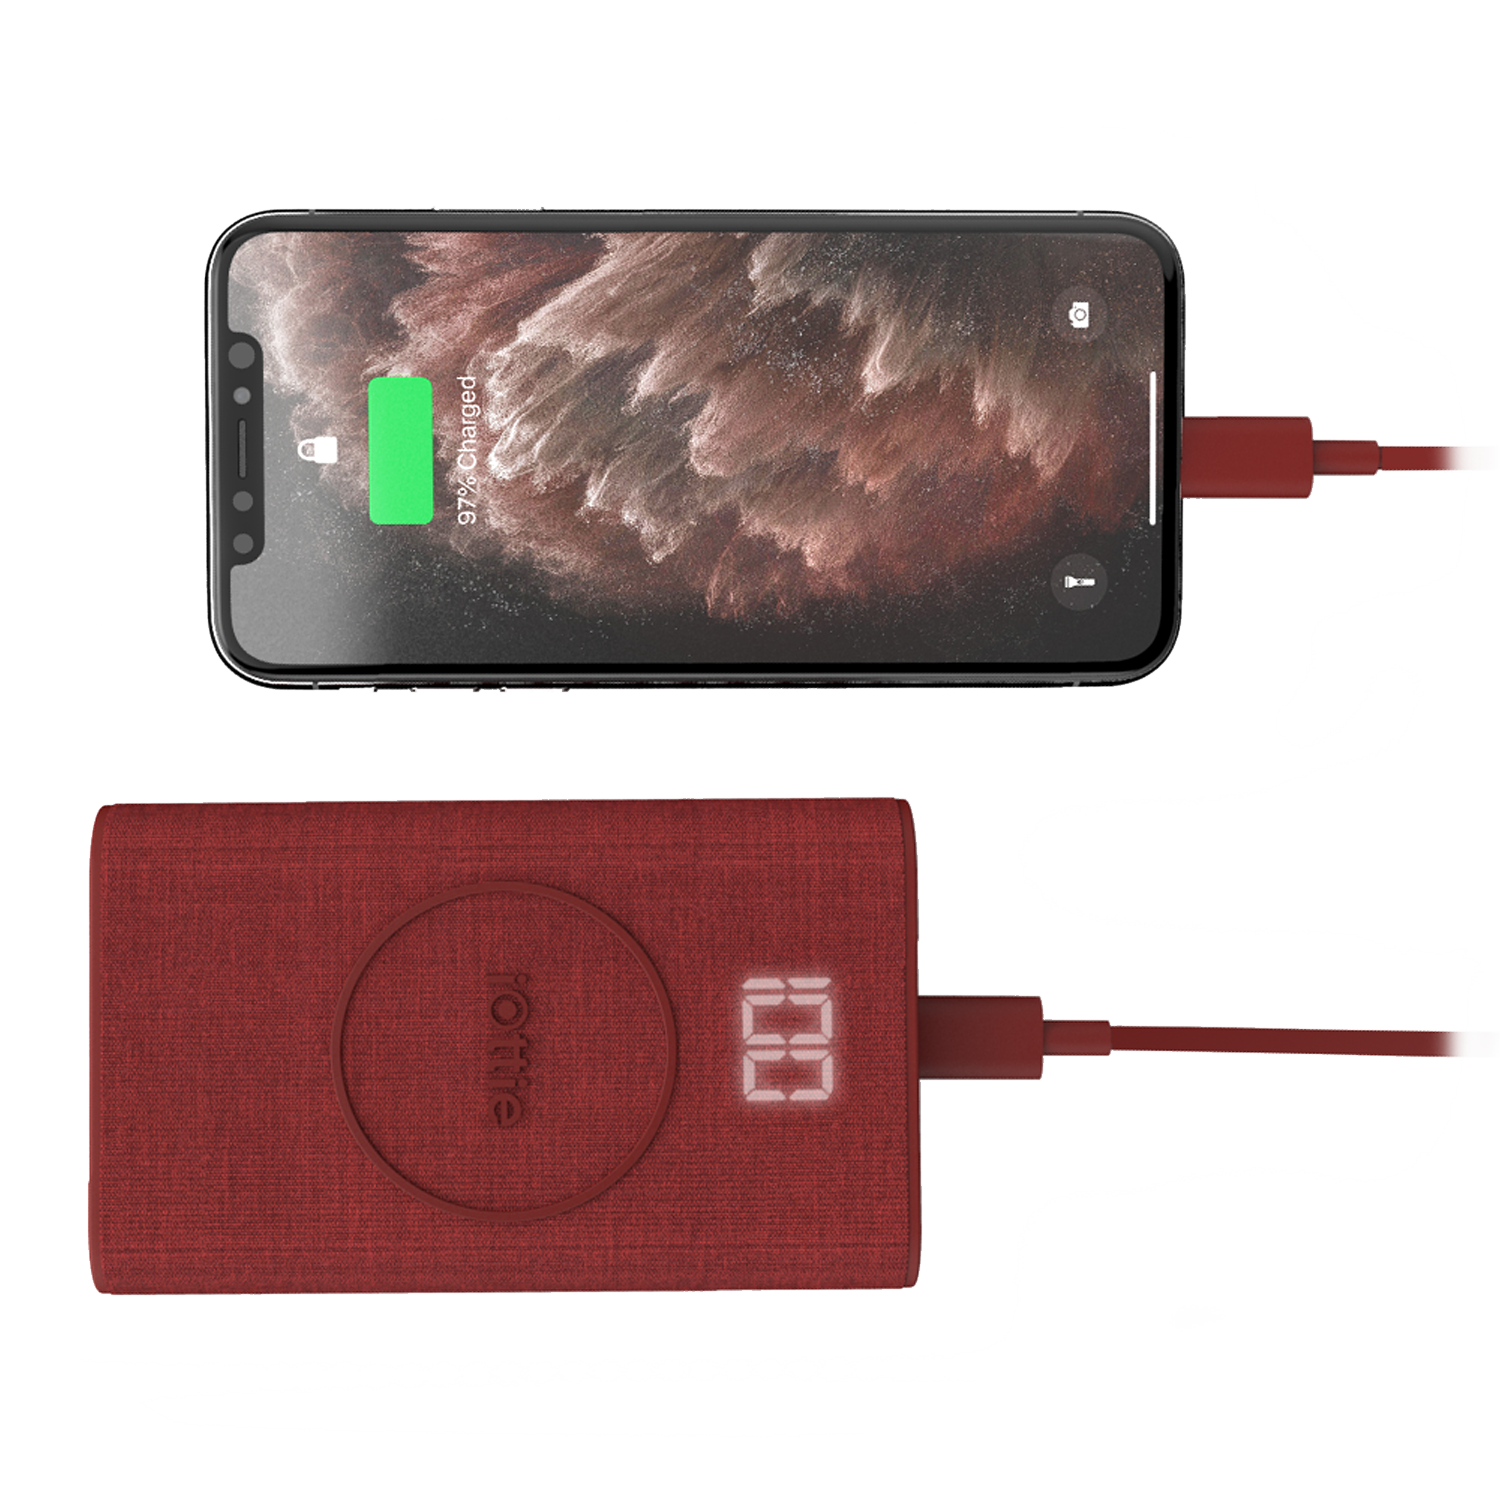 iPhone Charging on the iON Wireless Go Power Bank in Ruby, Portable Battery Pack via USB